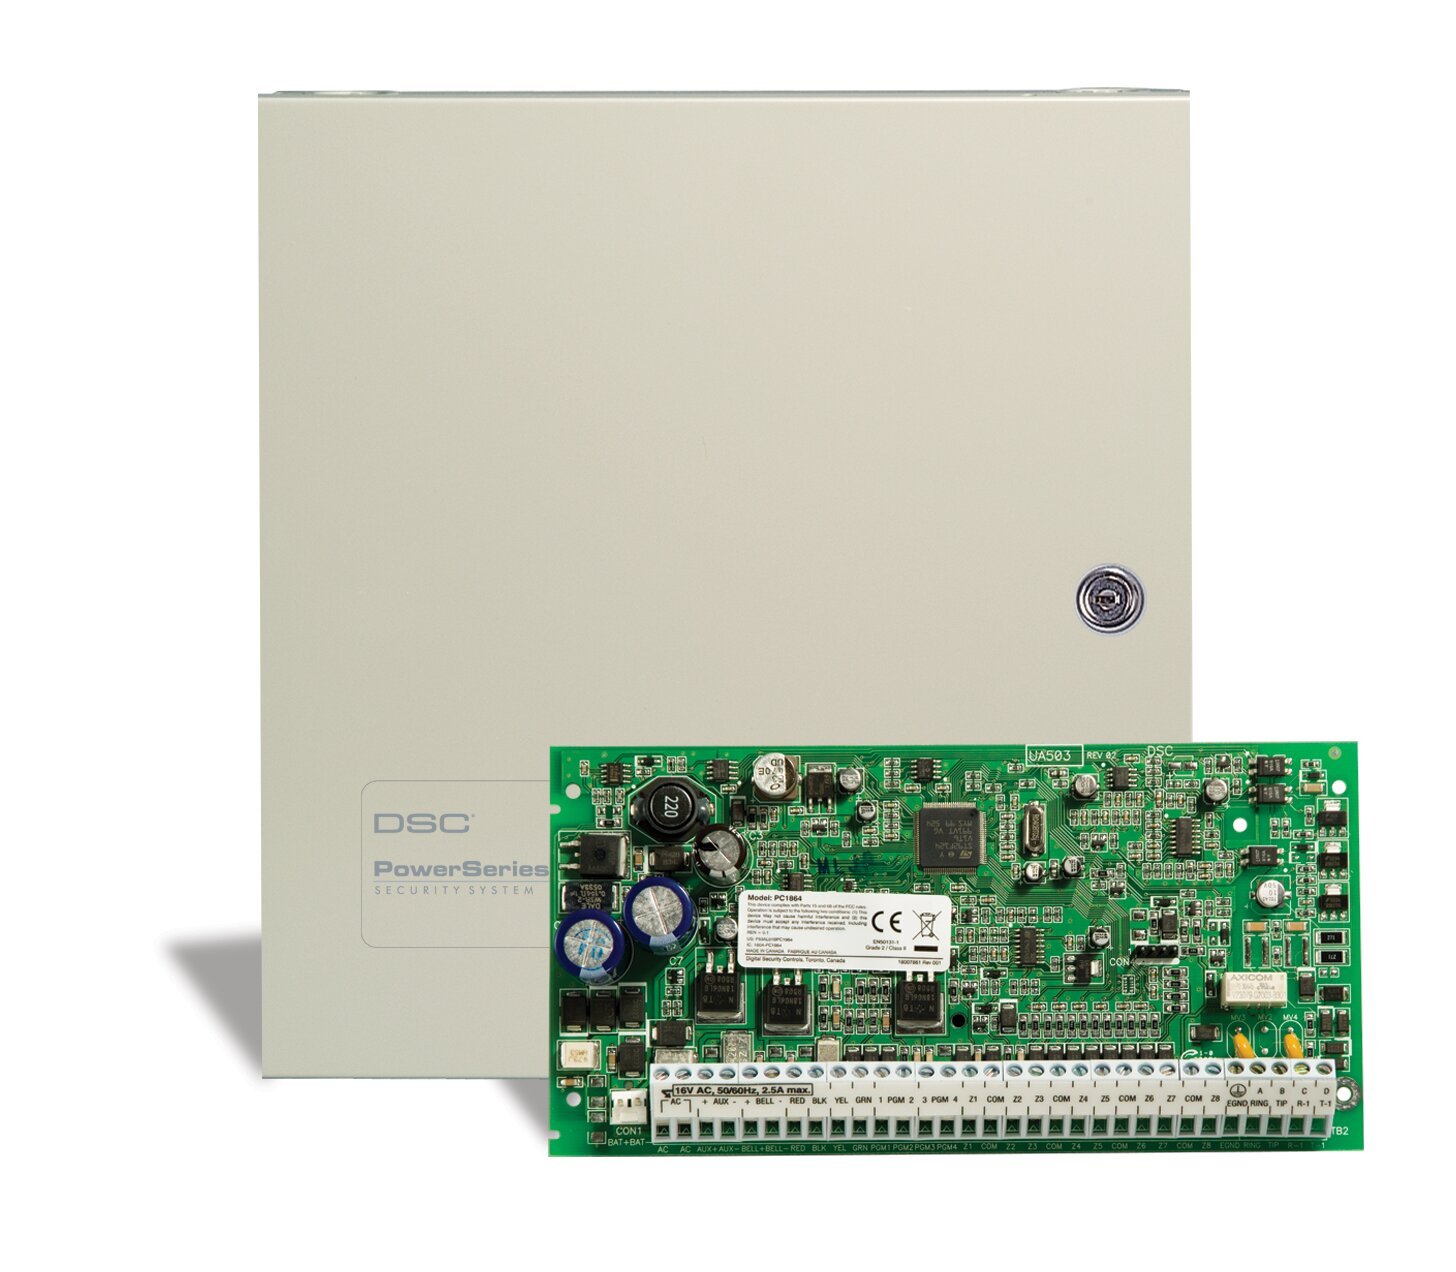 DSC PowerSeries PC1864 8-Zone Onboard expandable to 64-Zone PCB Only Panel